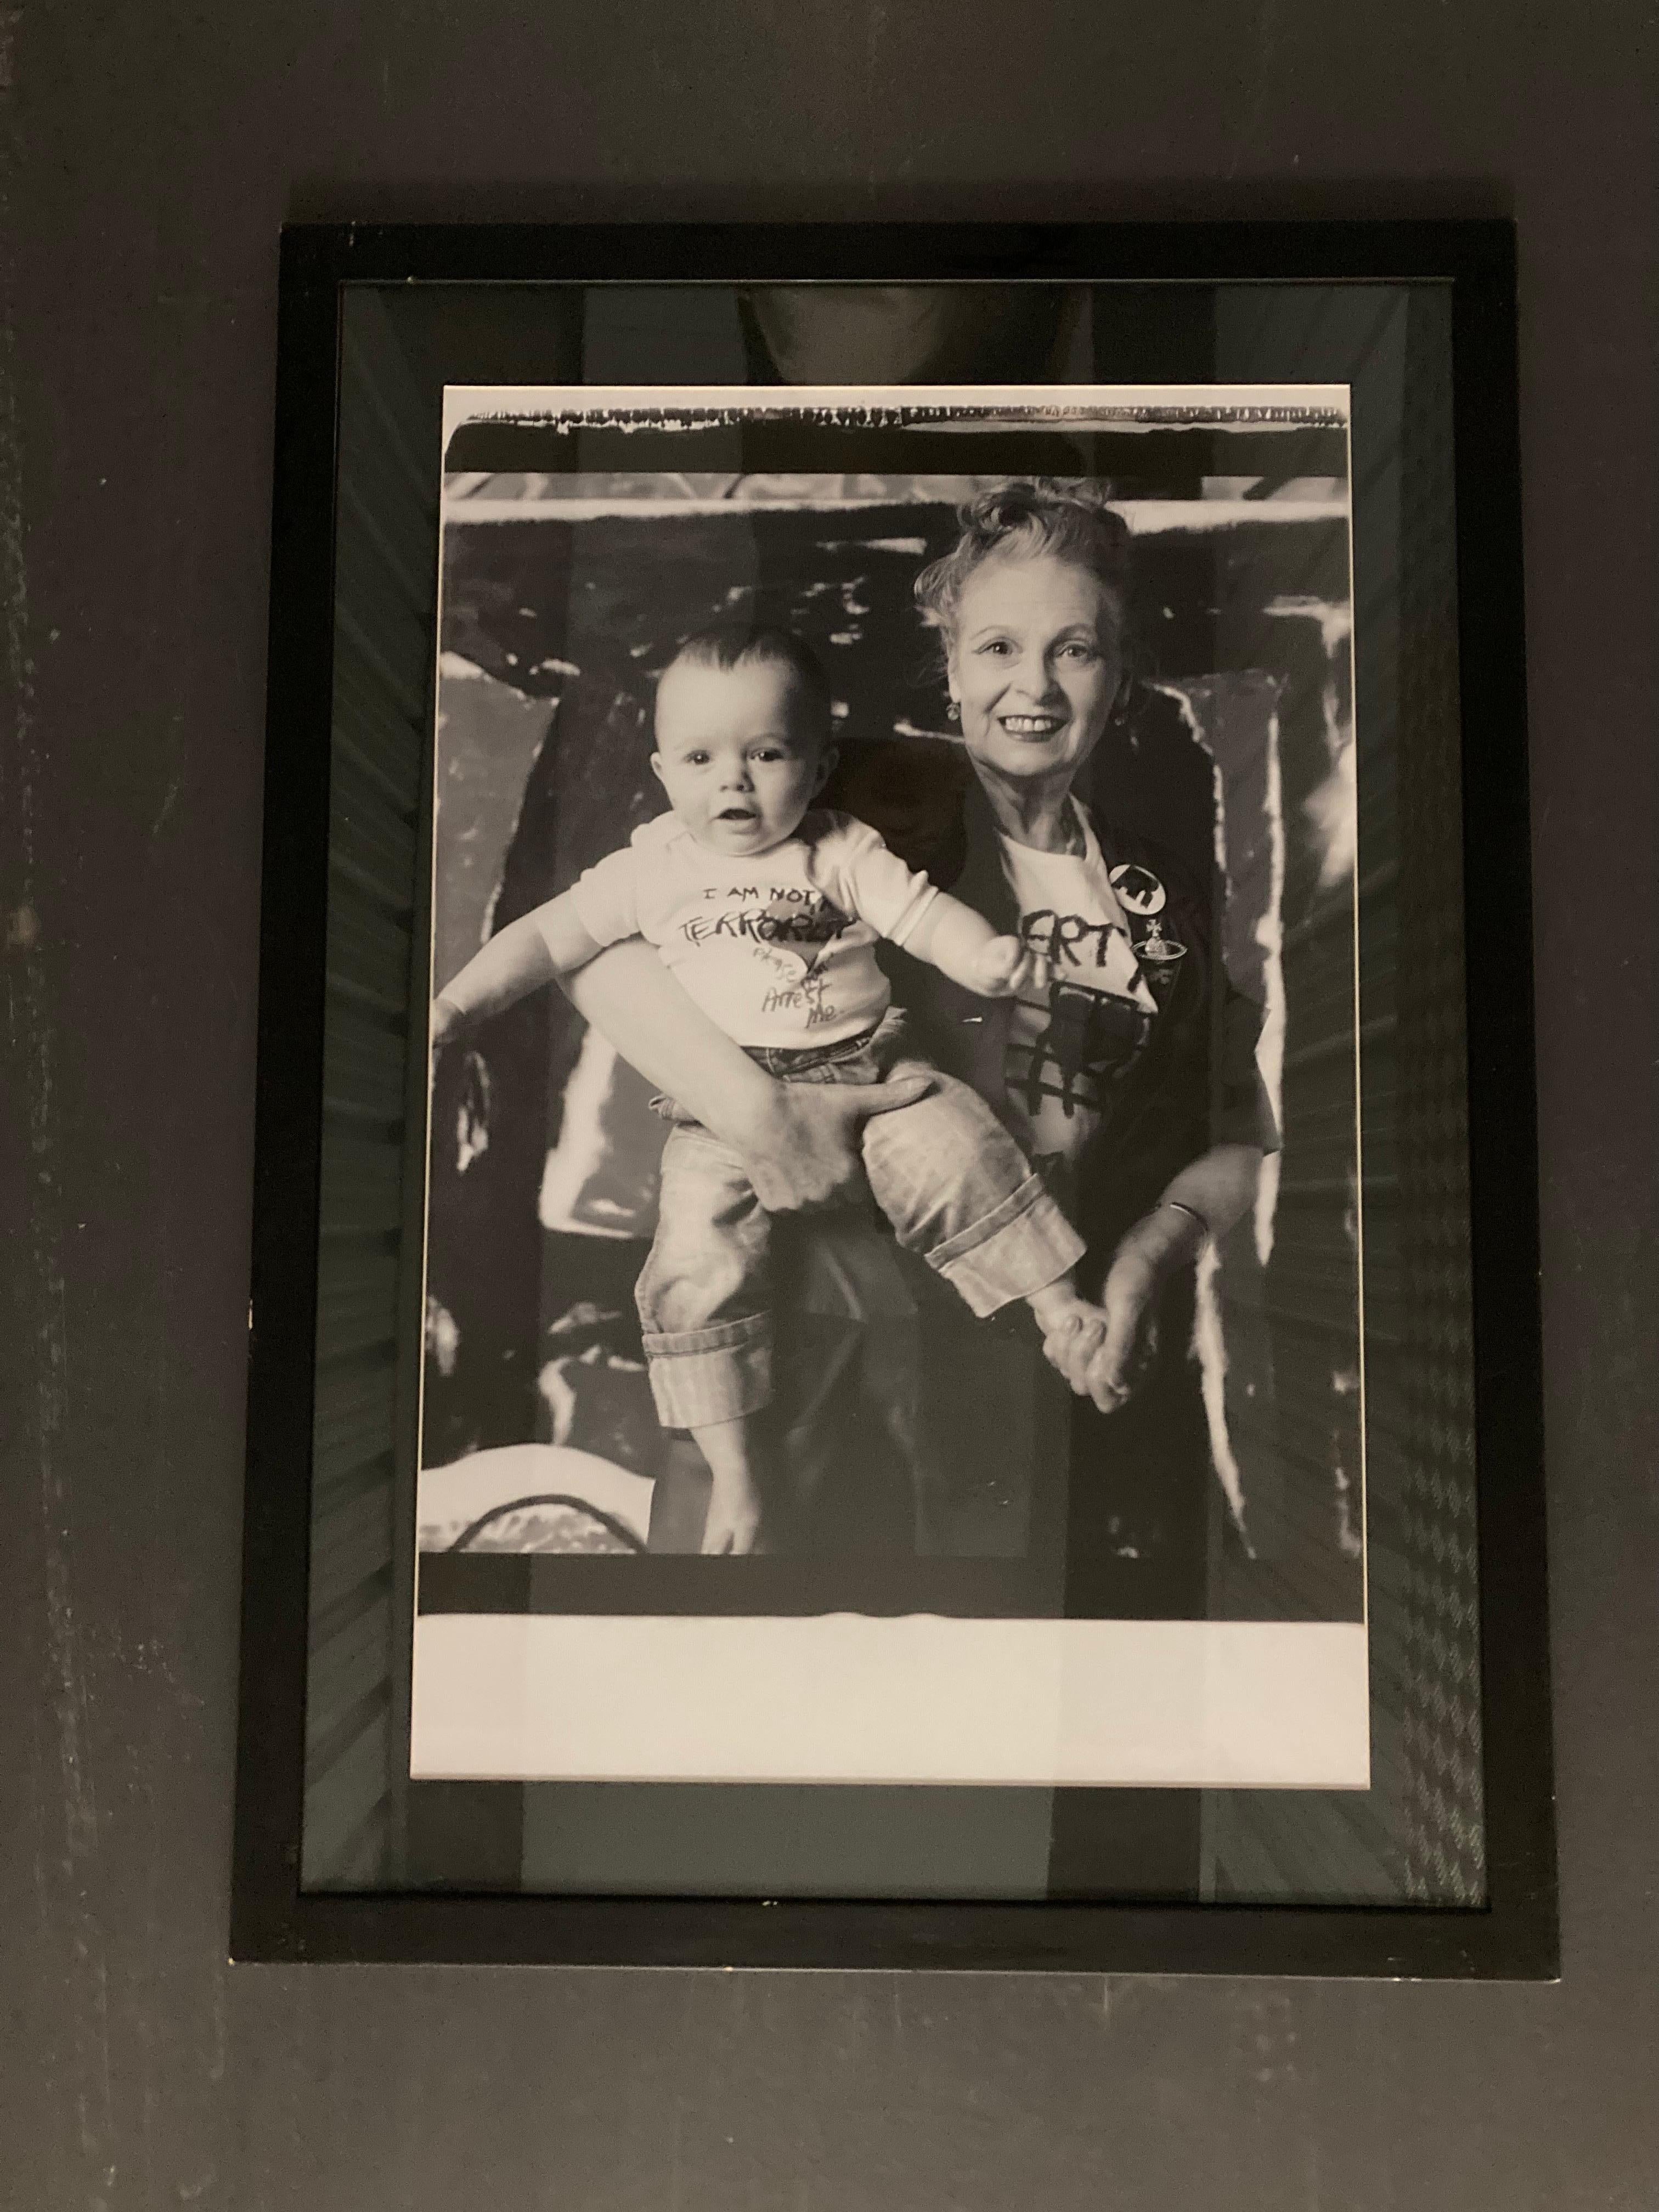 An original one-off large format Polaroid photograph of Vivienne Westwood and child for the Vivienne Westwood Active Resistance limited edition book produced by Opus. By photographer Zenon Texeira.

Large-format polaroids are extremely rare and